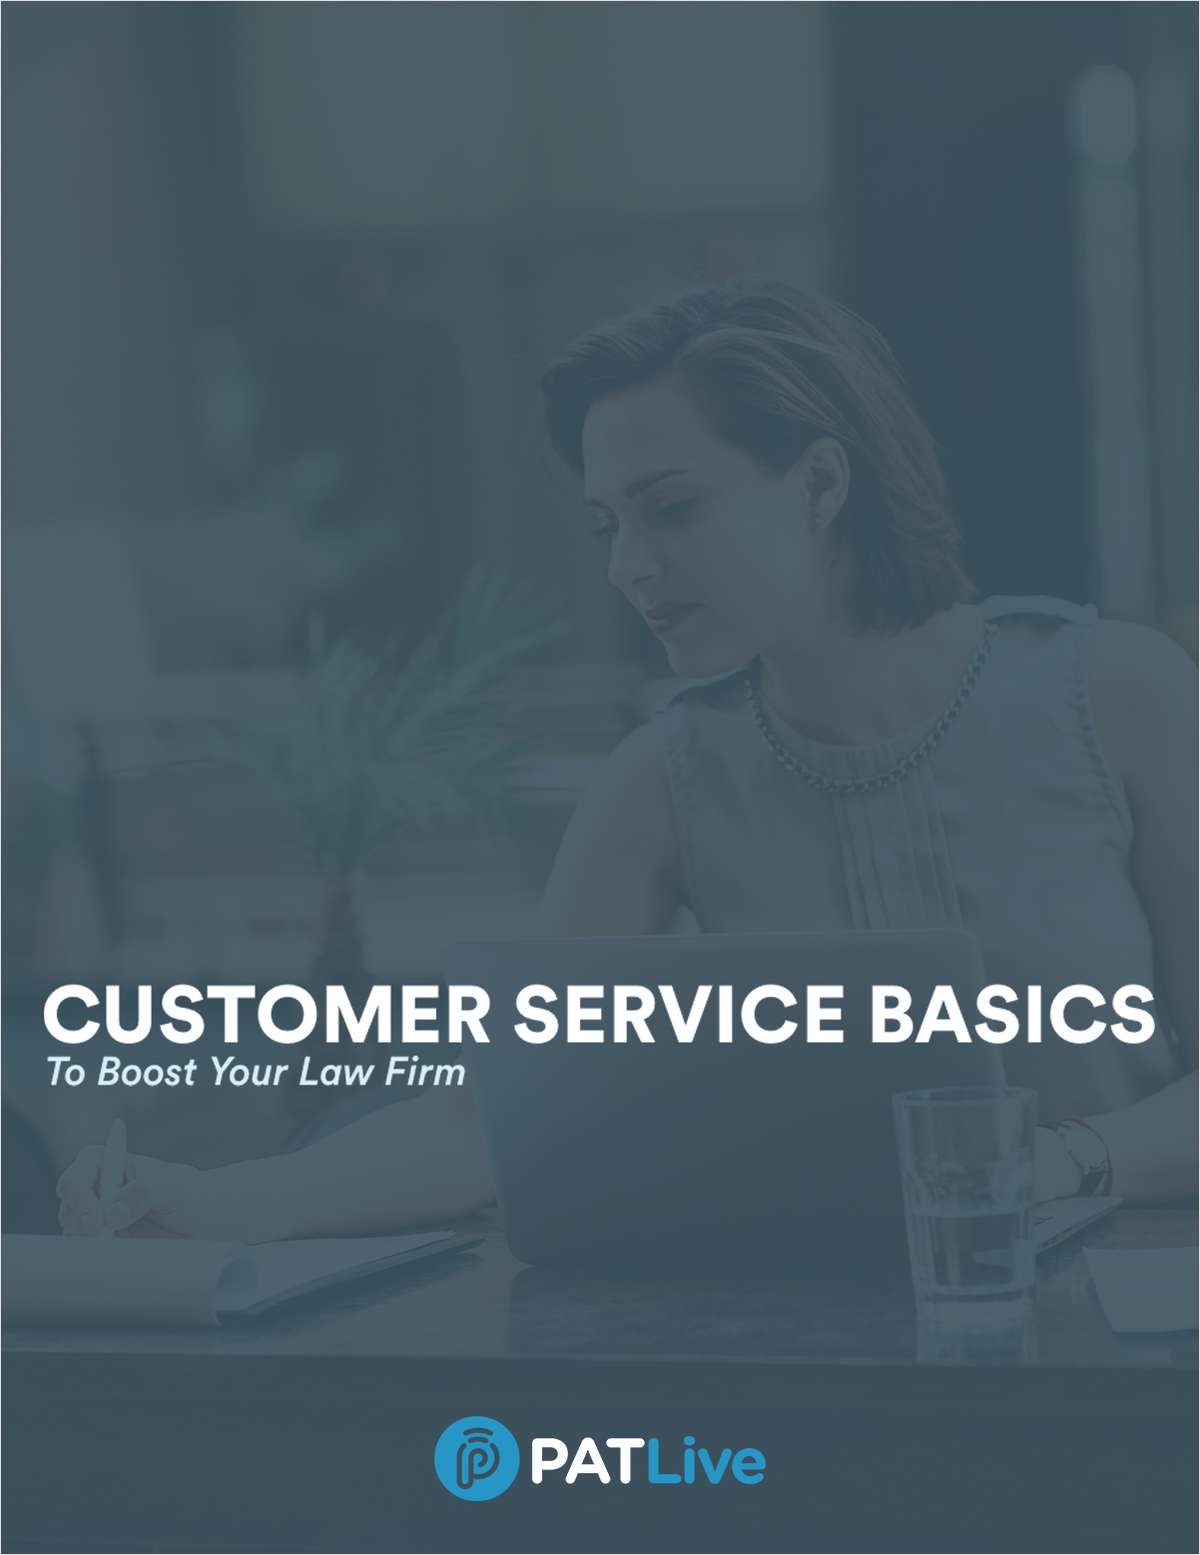 Customer Service Basics to Boost Your Law Firm